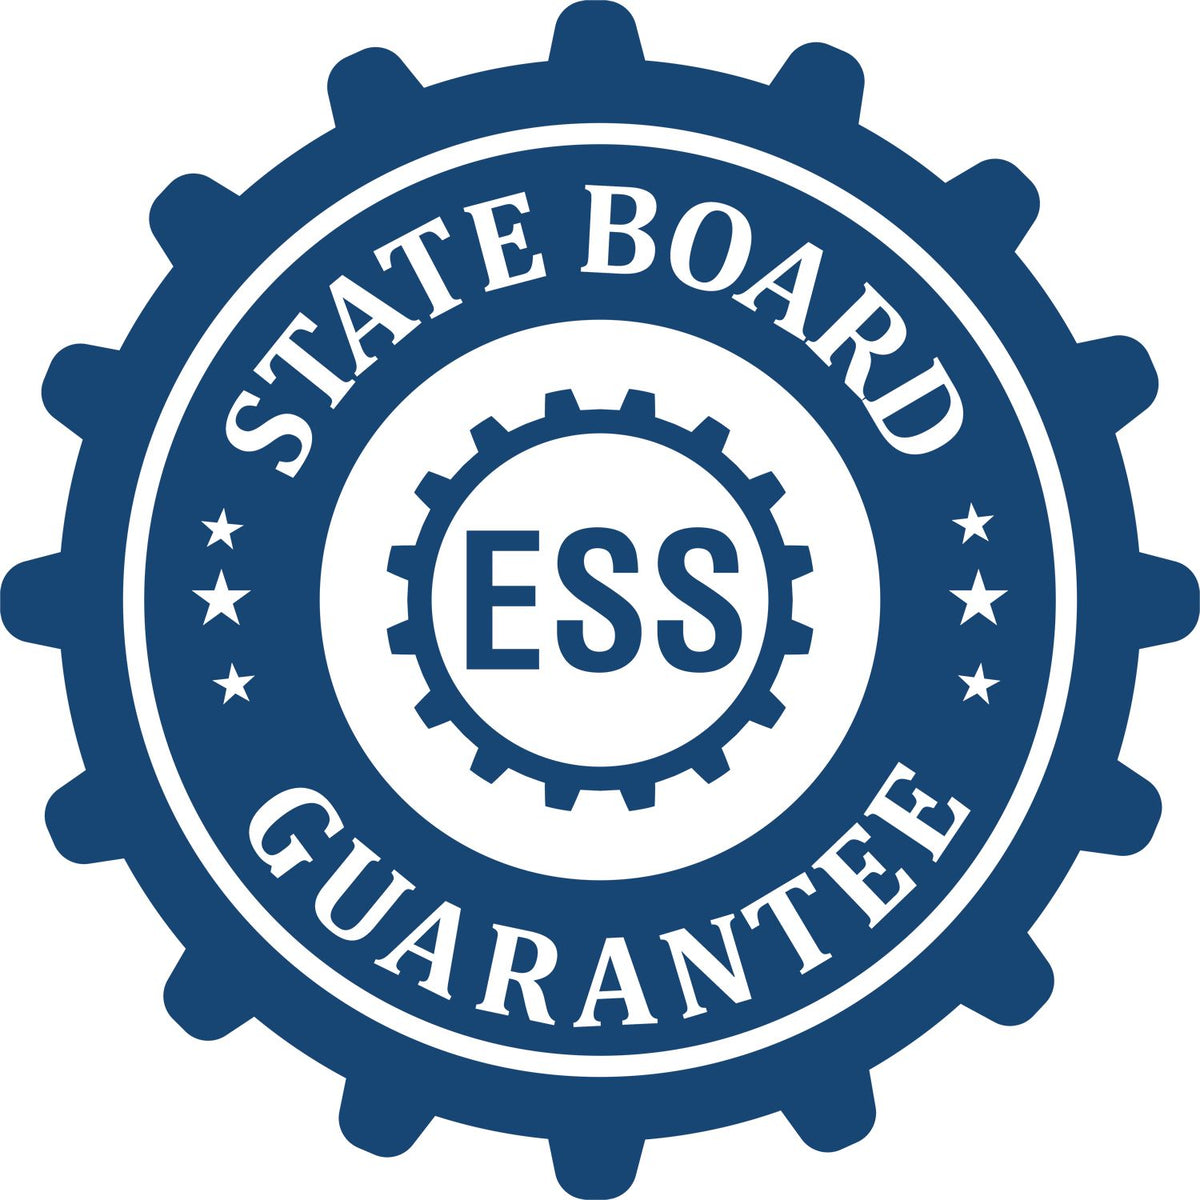 An emblem in a gear shape illustrating a state board guarantee for the Hybrid Nevada Architect Seal